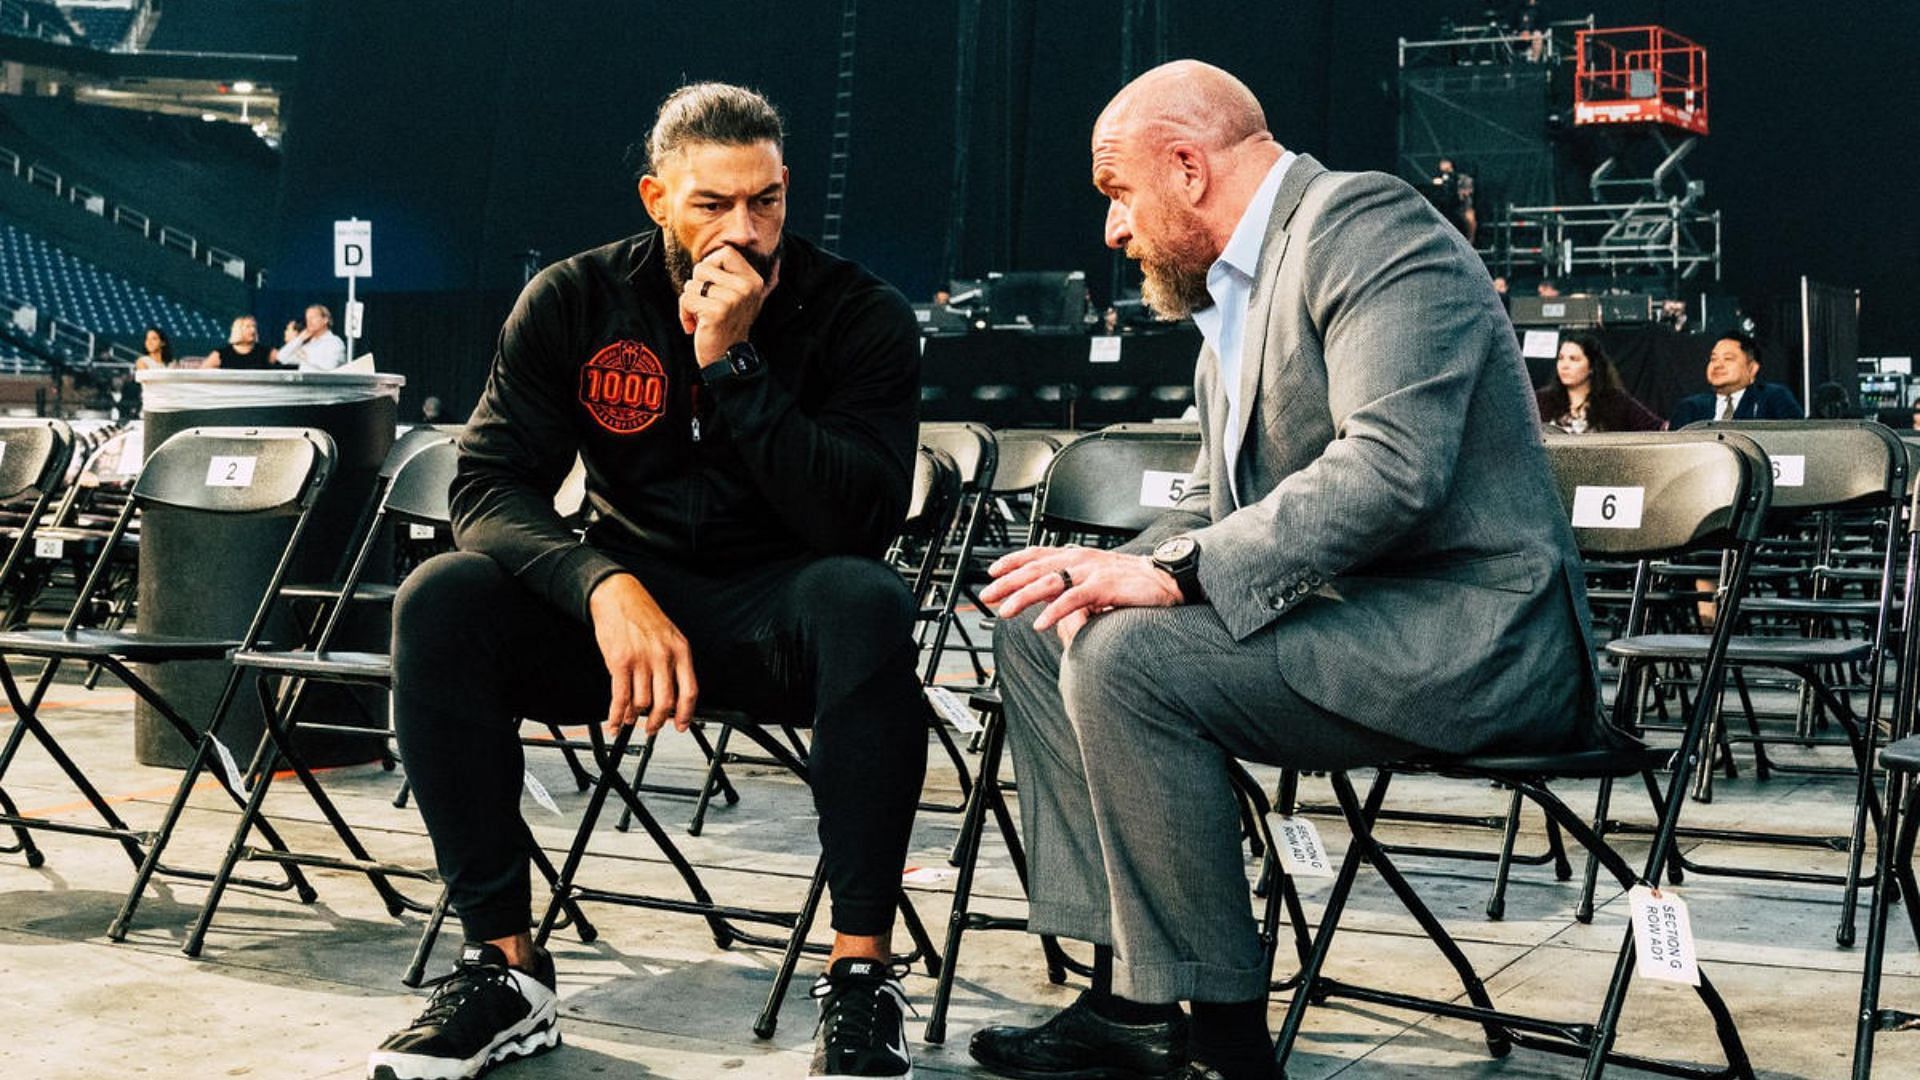 Roman Reigns (left); WWE Chief Content Officer Triple H (right)